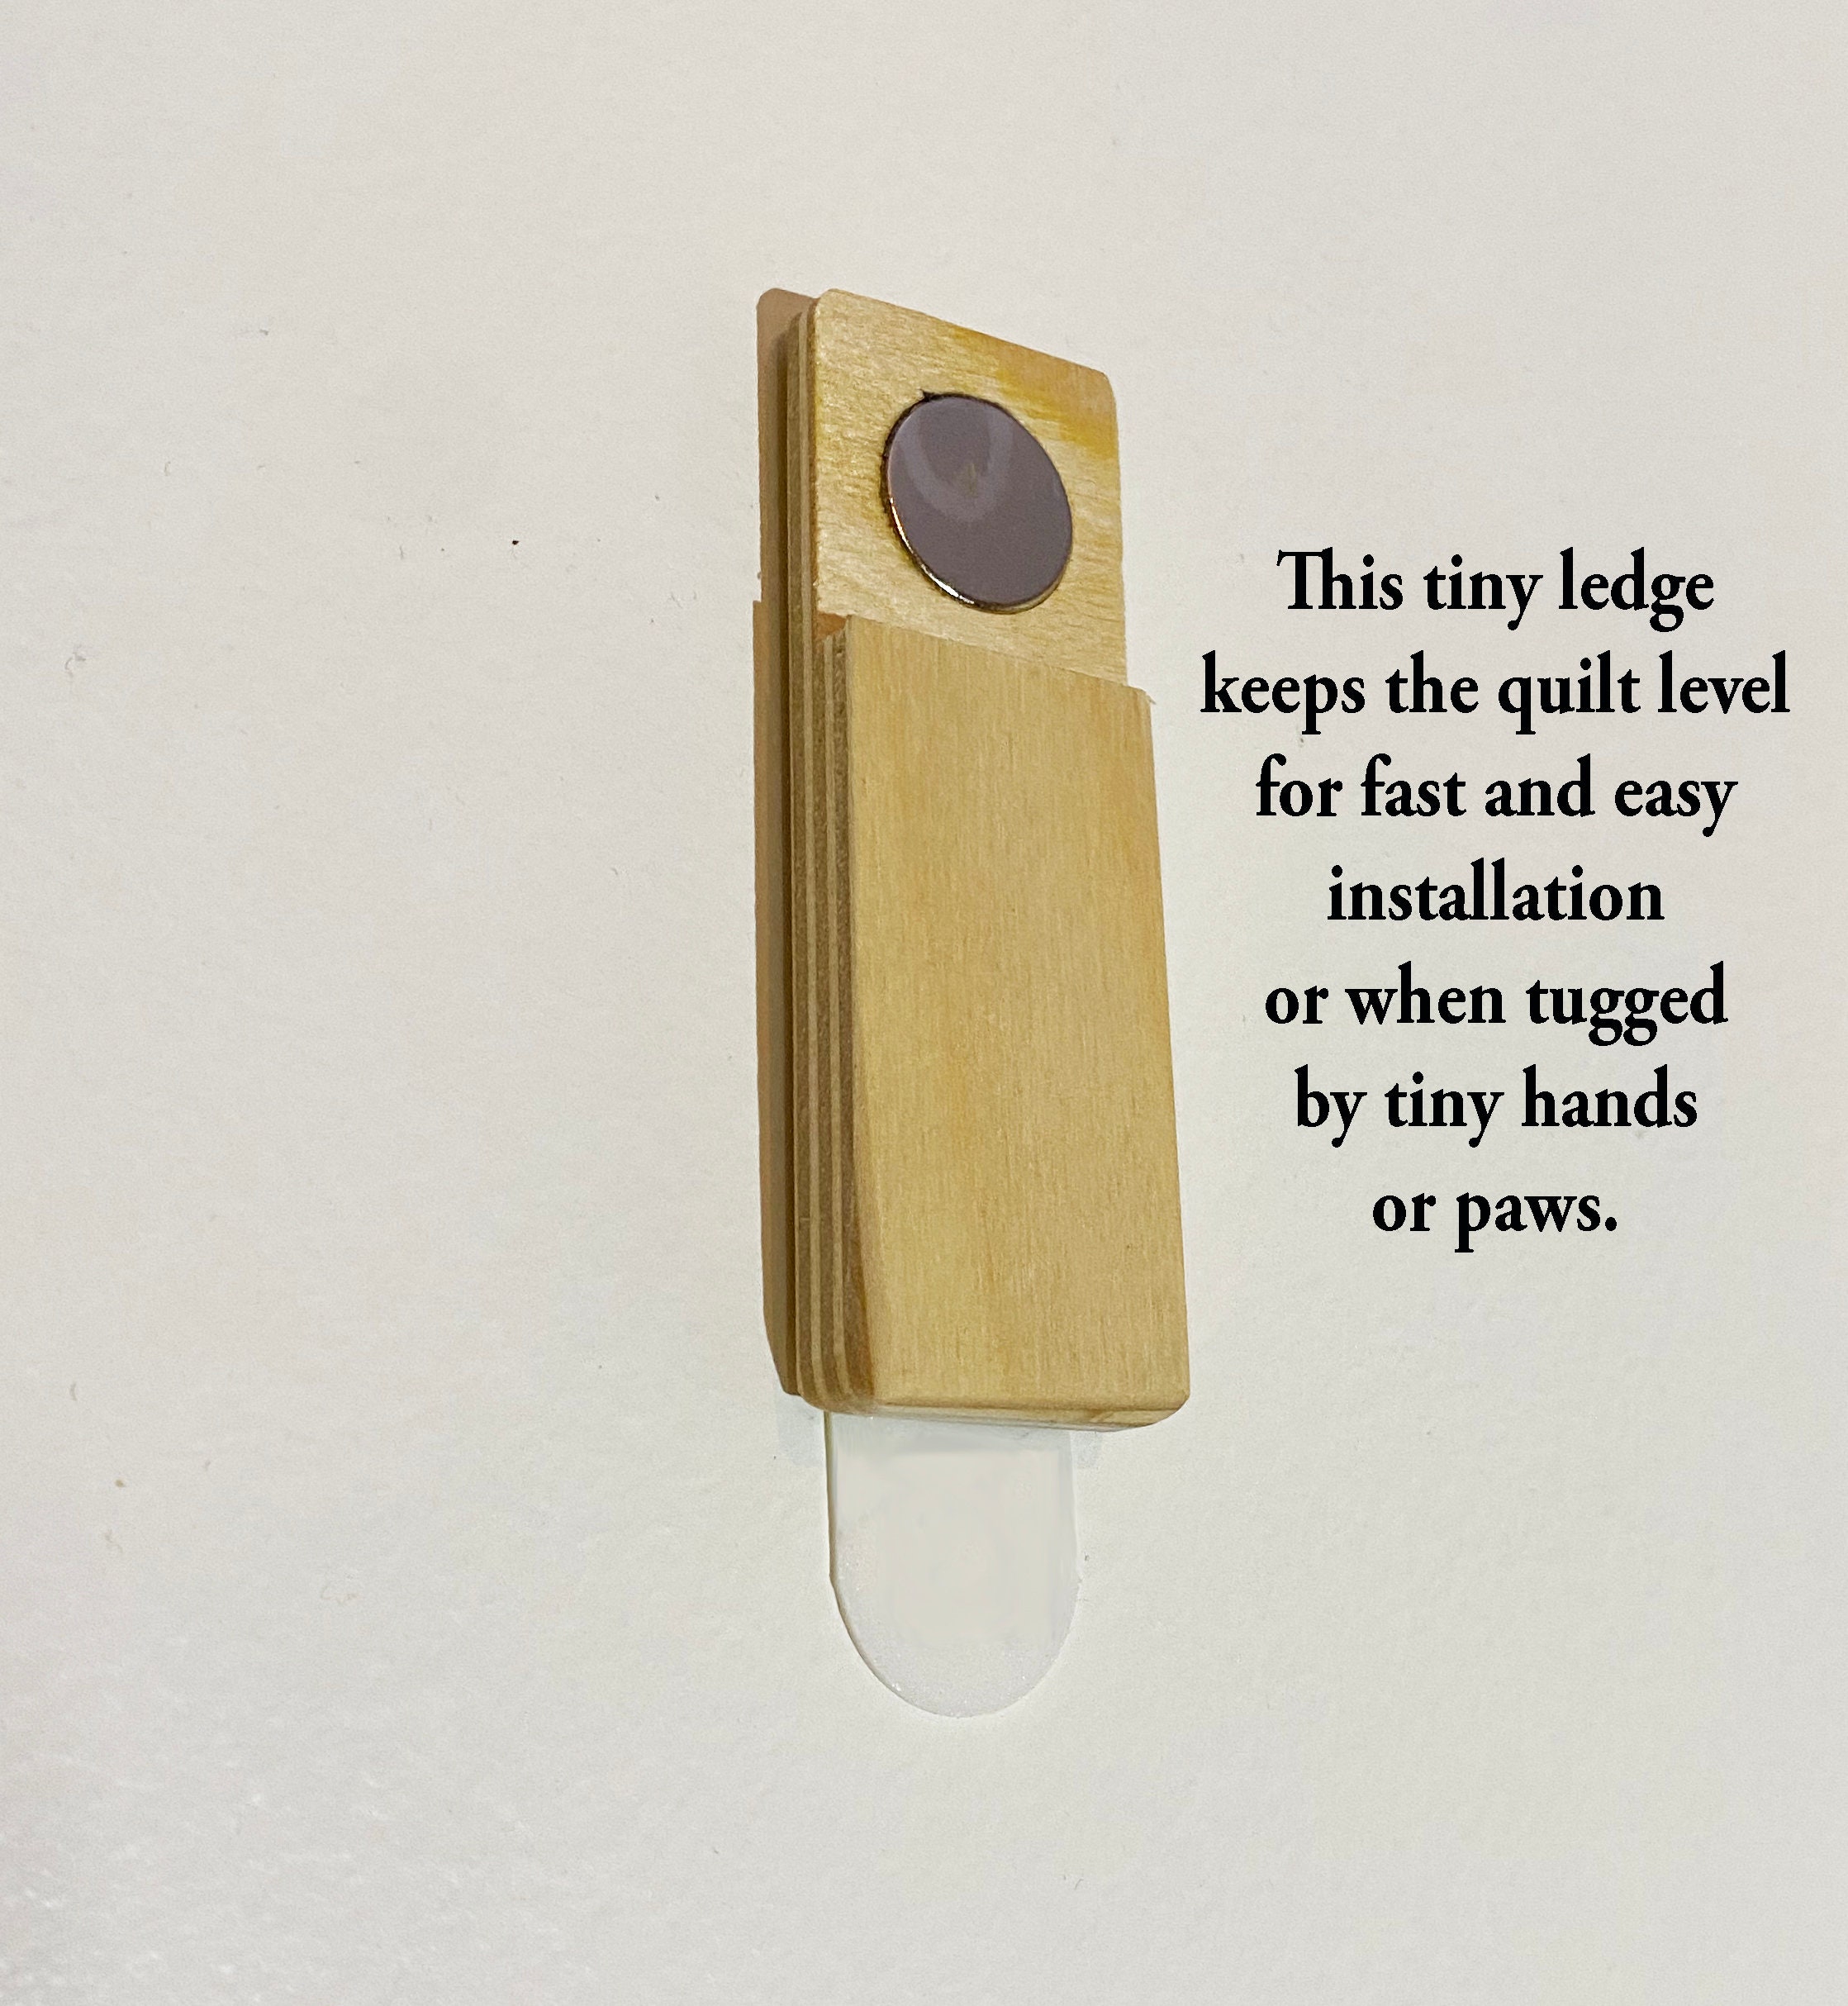 Invisible Quilt Hangers for Walls - Quilt Hanging Solutions by The Hang-Ups  Company from Ashland, Oregon